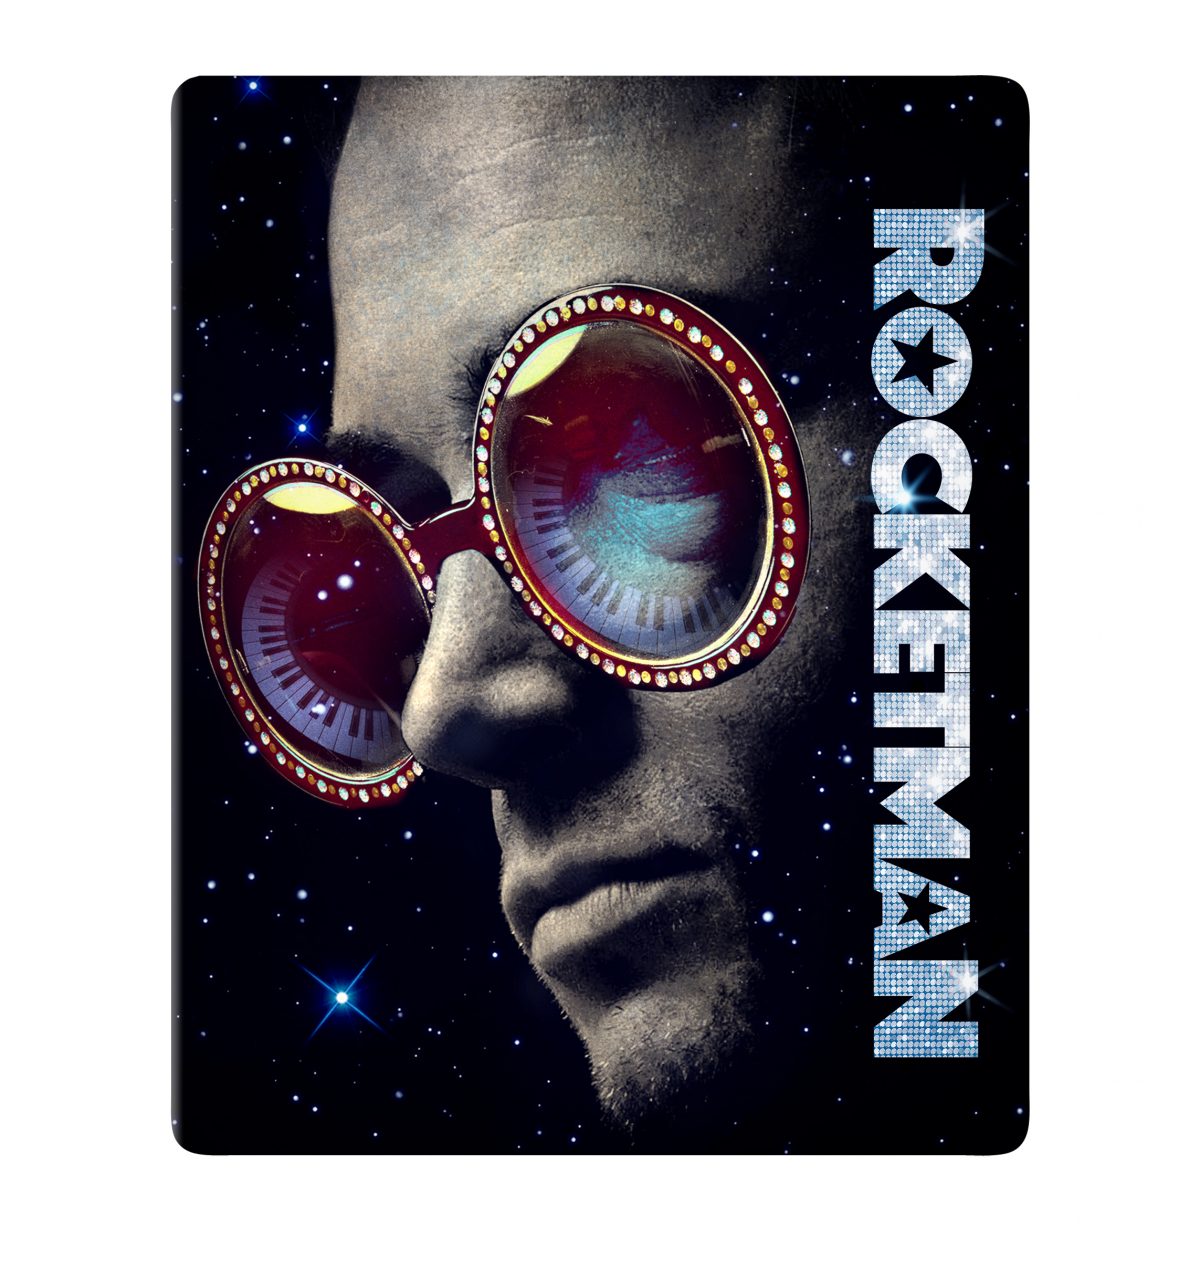 Rocketman Best Buy Limited Edition Steelbook 4K Ultra HD Combo Pack (Paramount Home Entertainment)